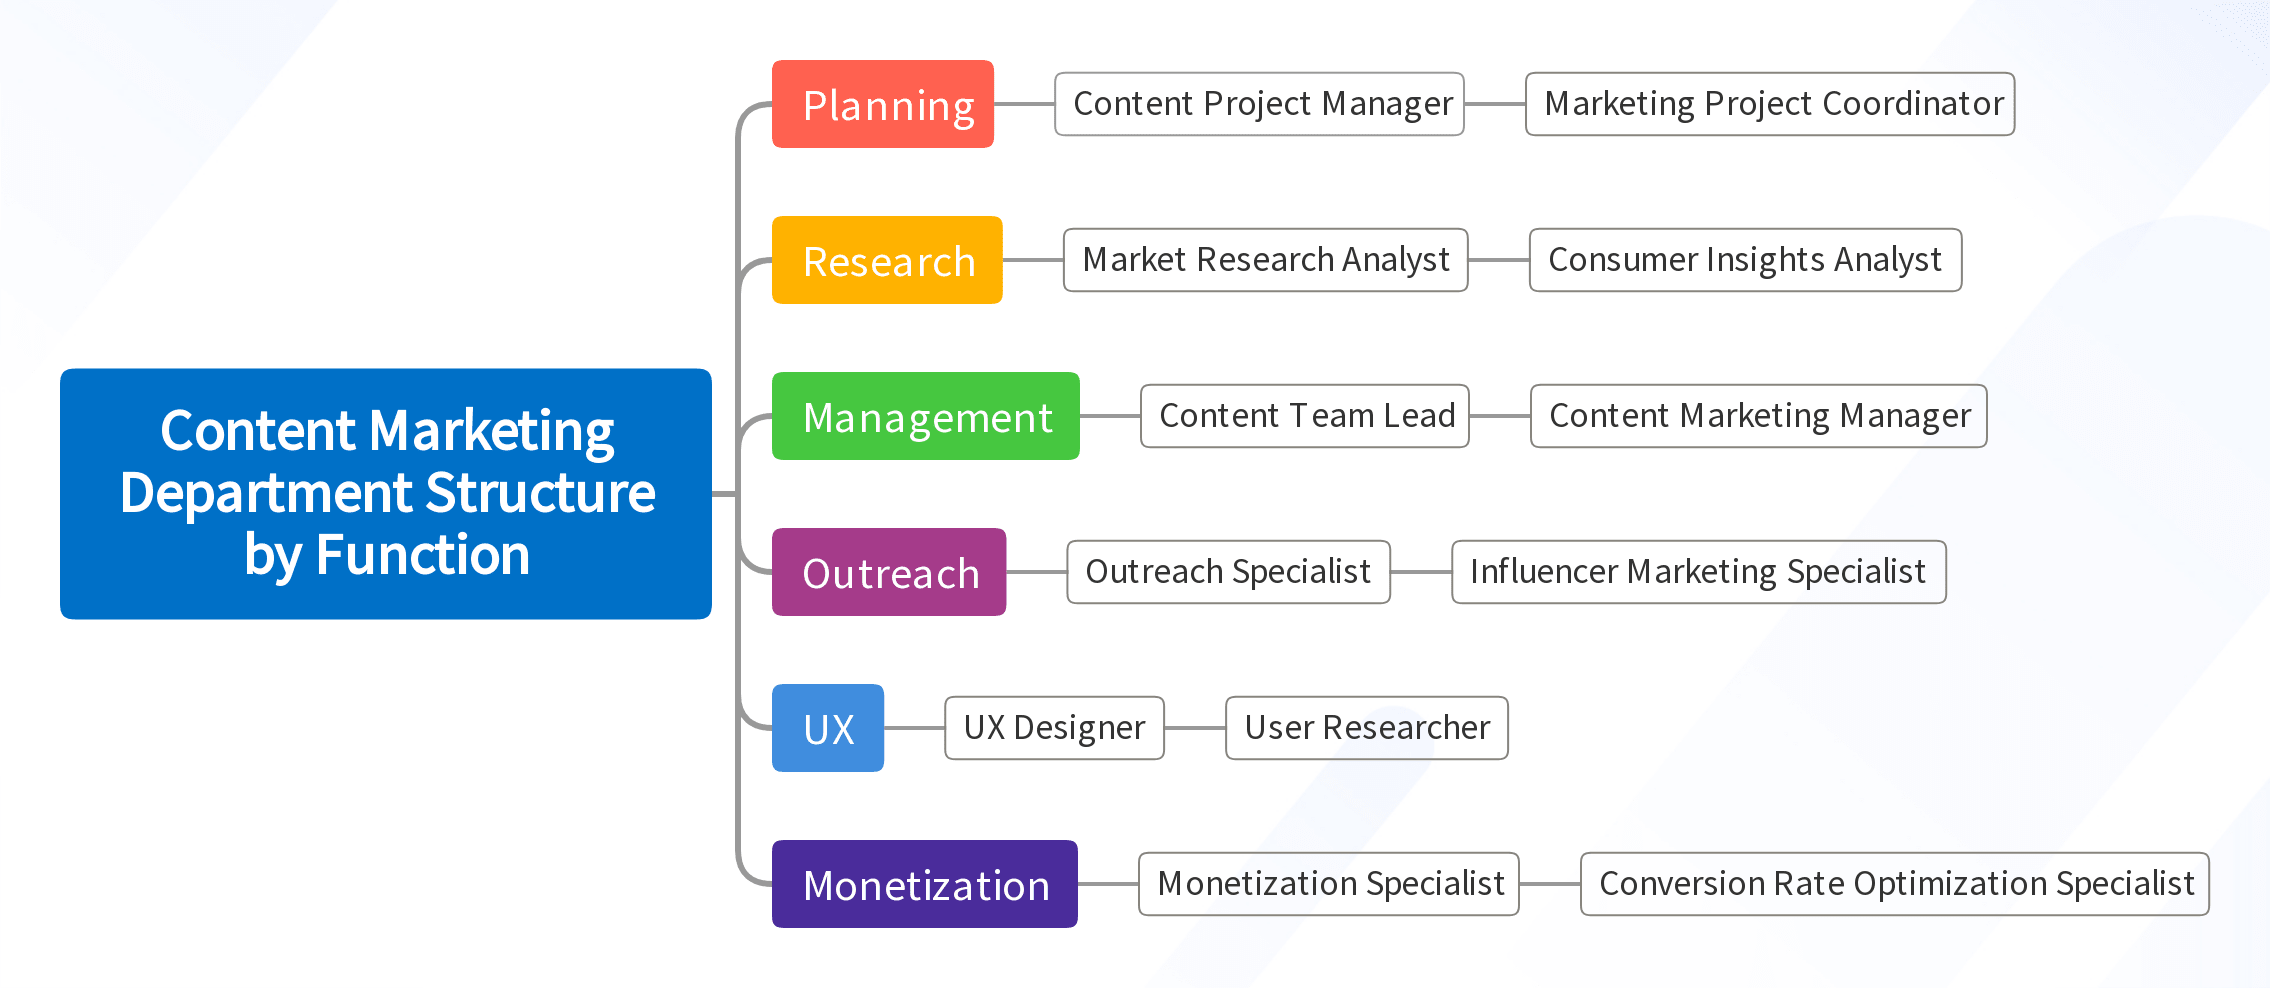 Content Marketing Department Structure by Function